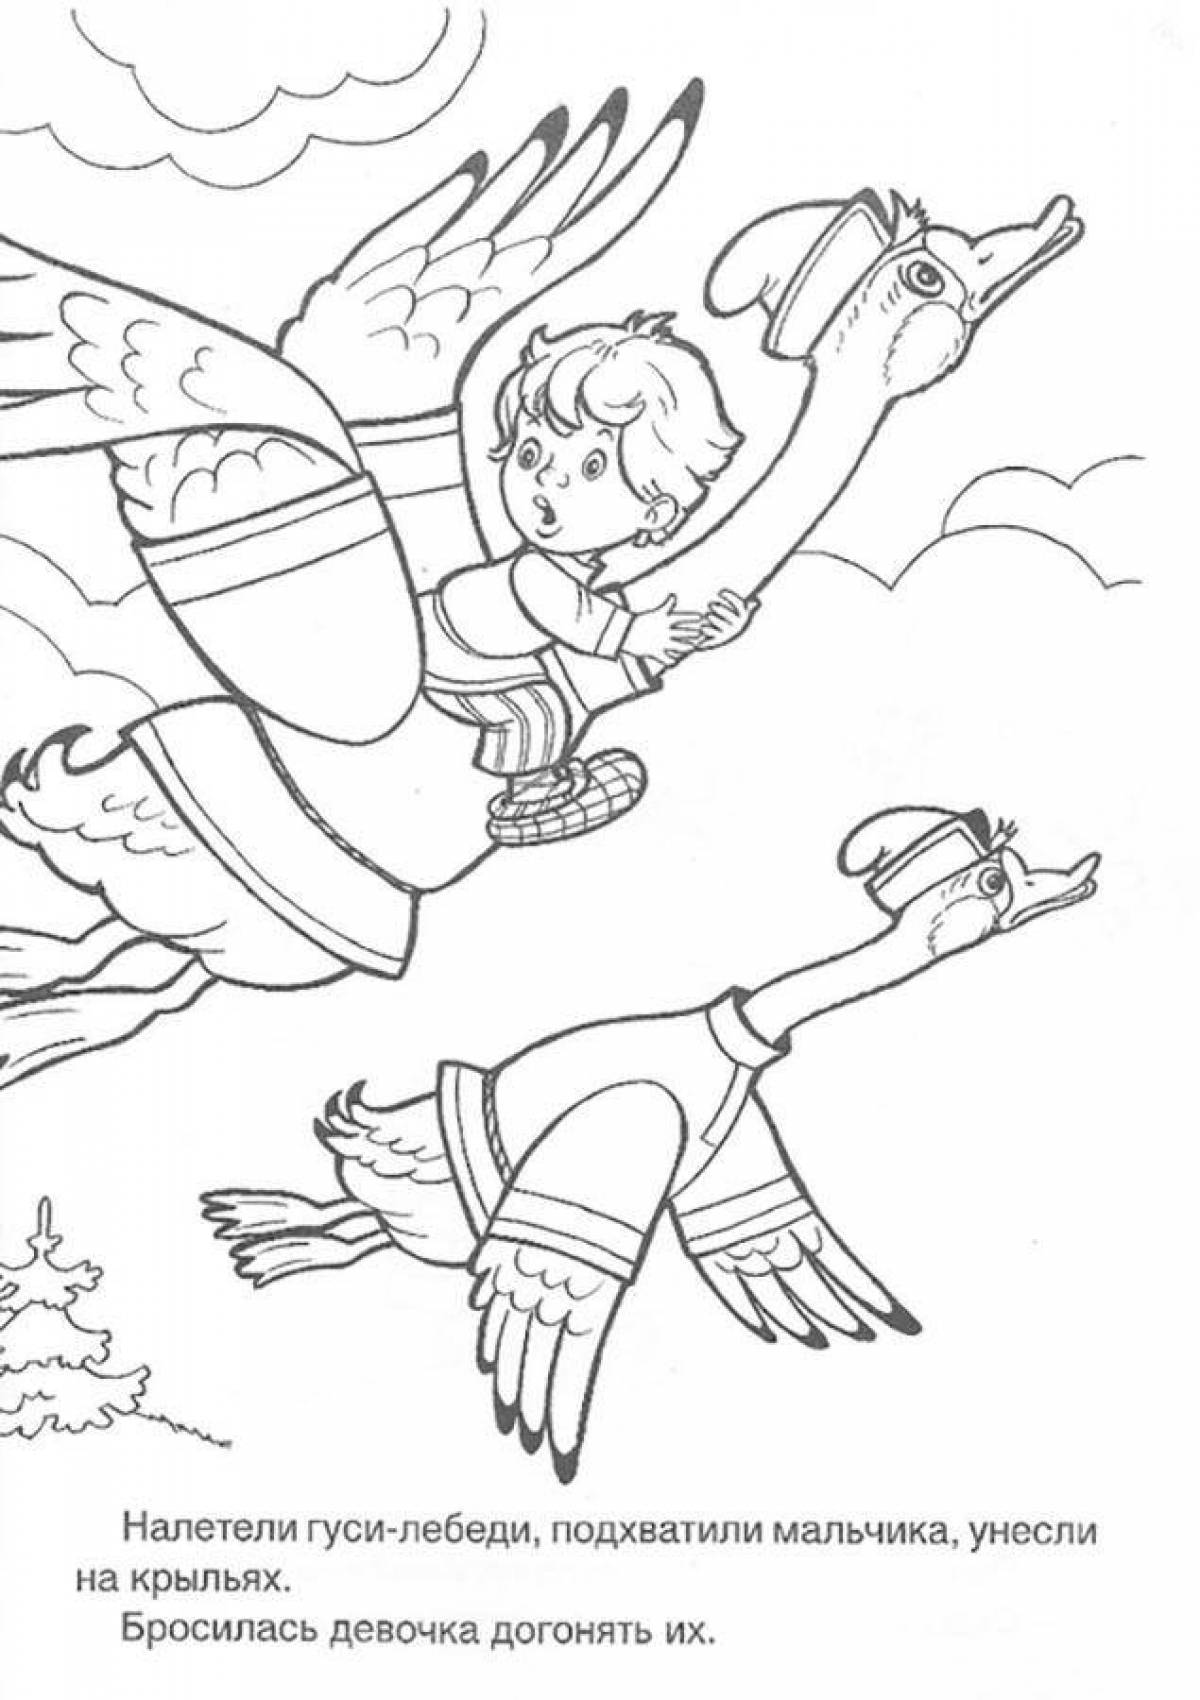 Children's swan geese coloring pages